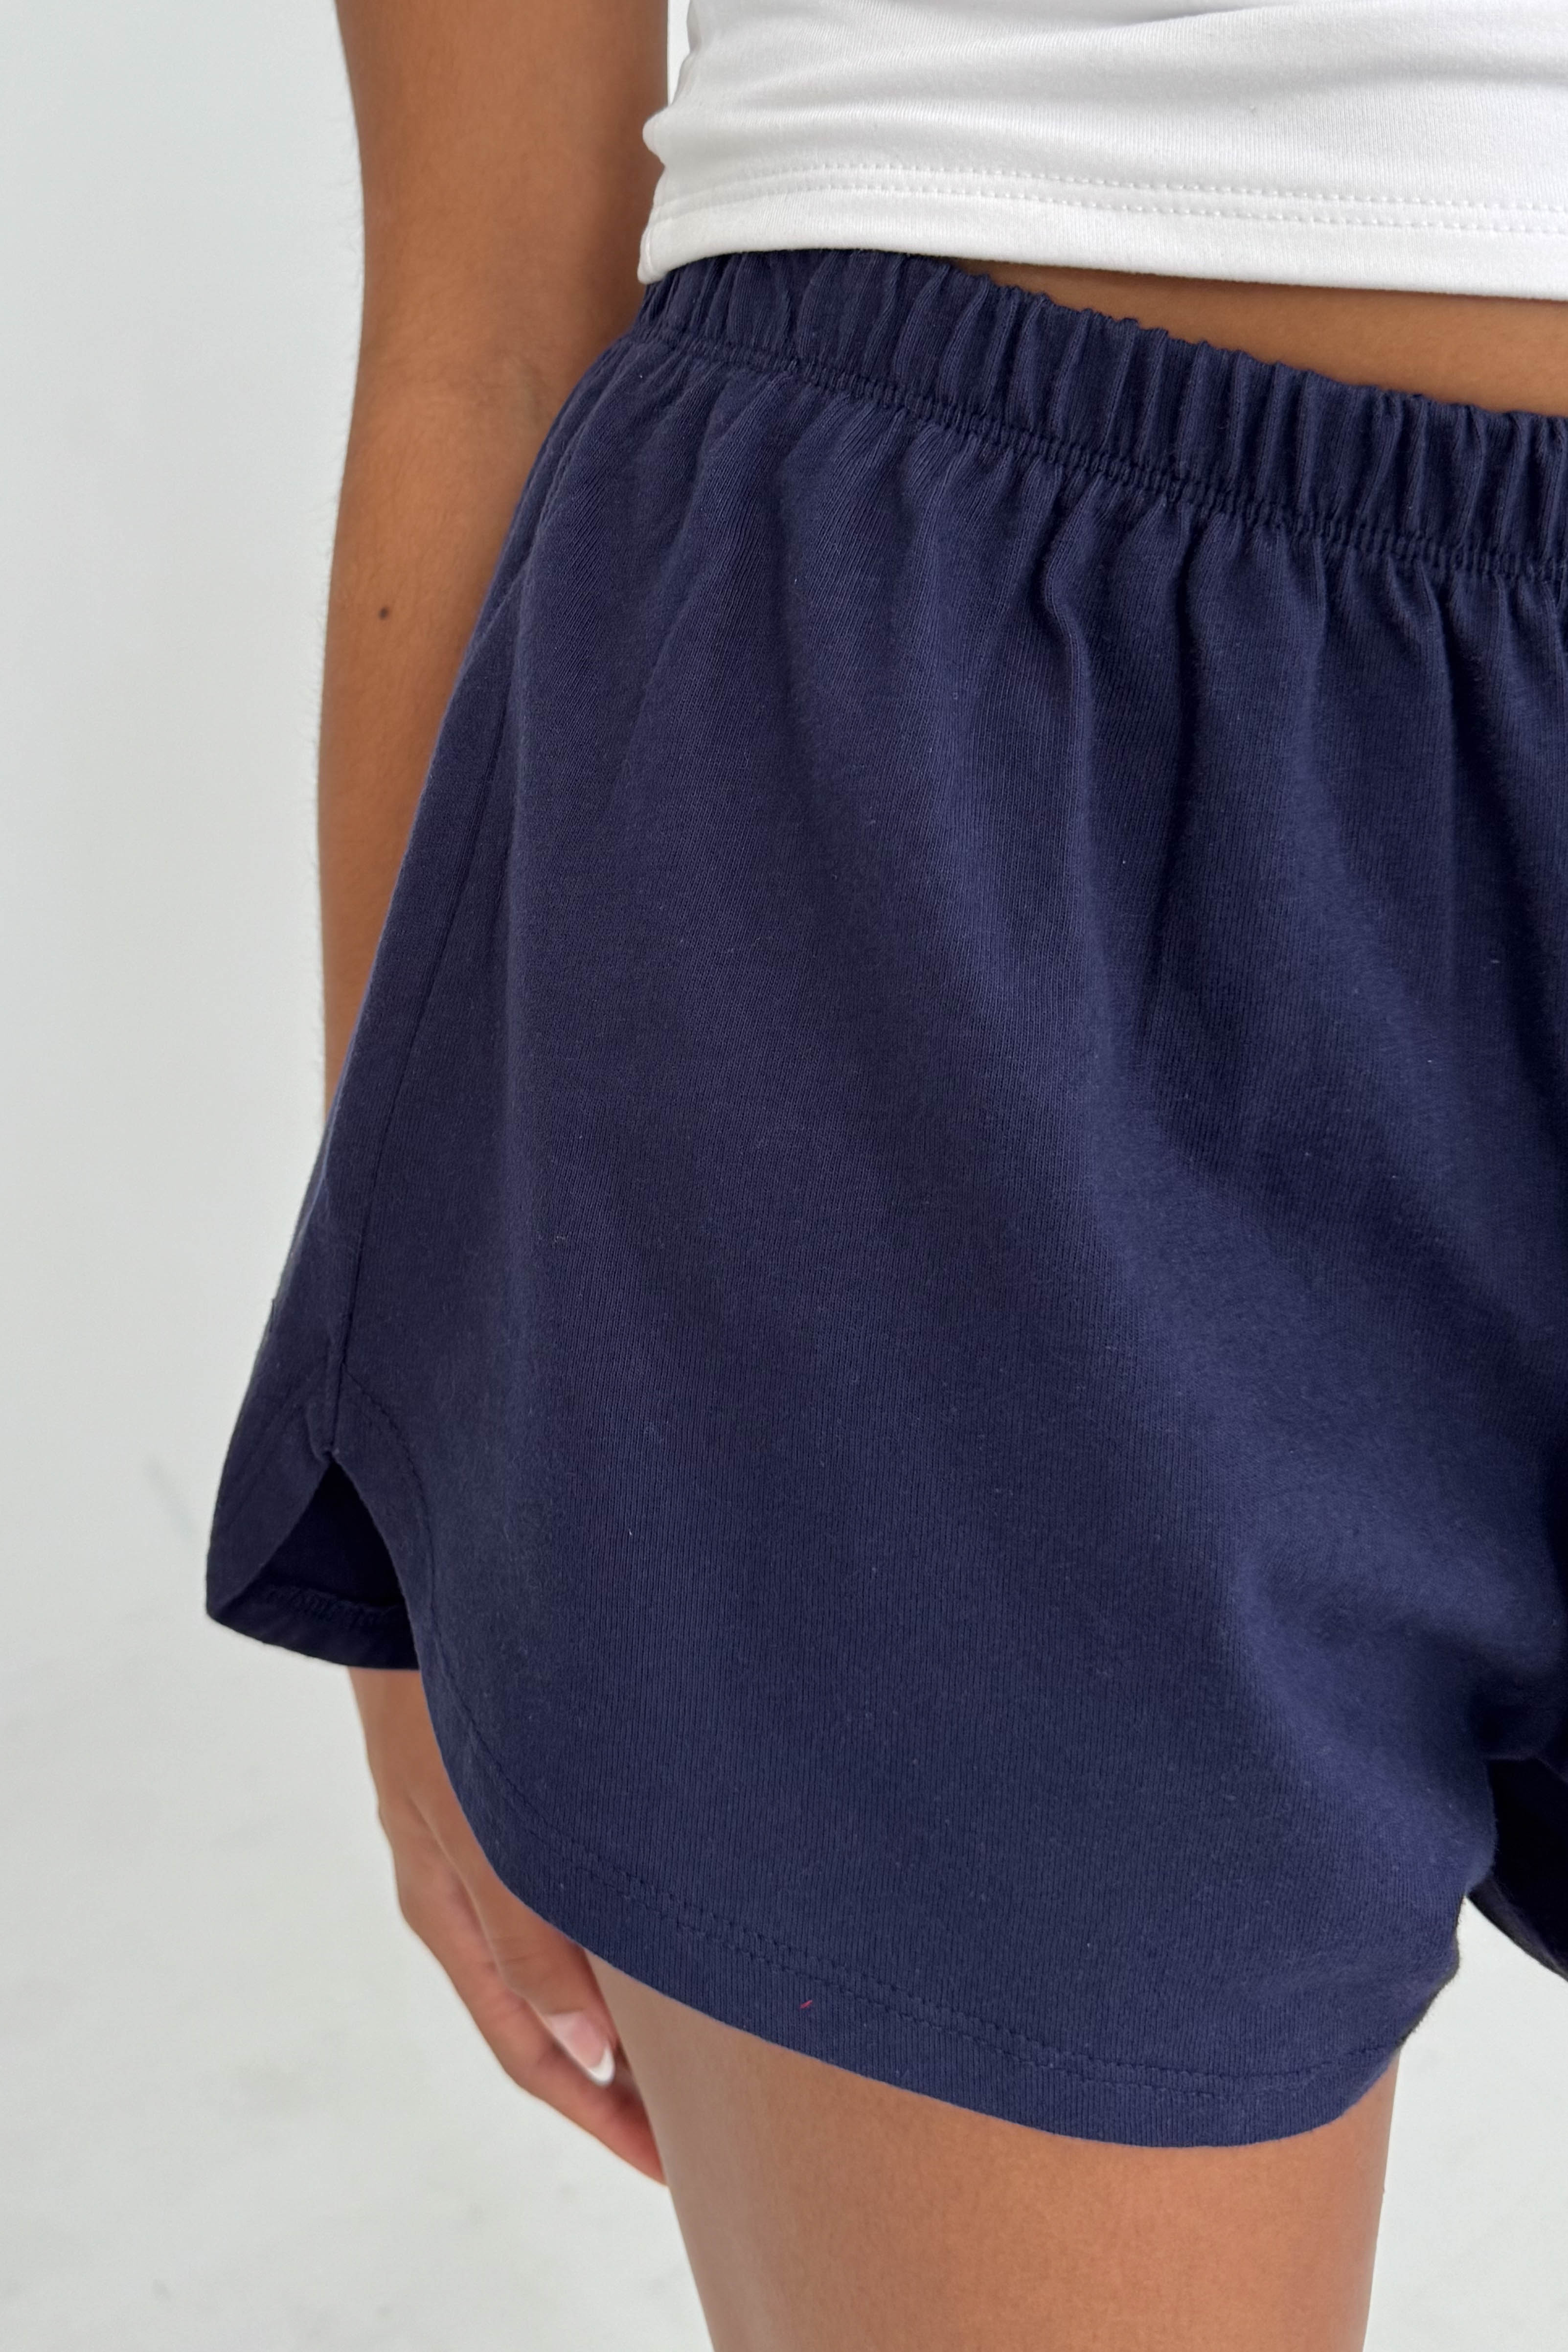 Easy Day Shorts in Navy